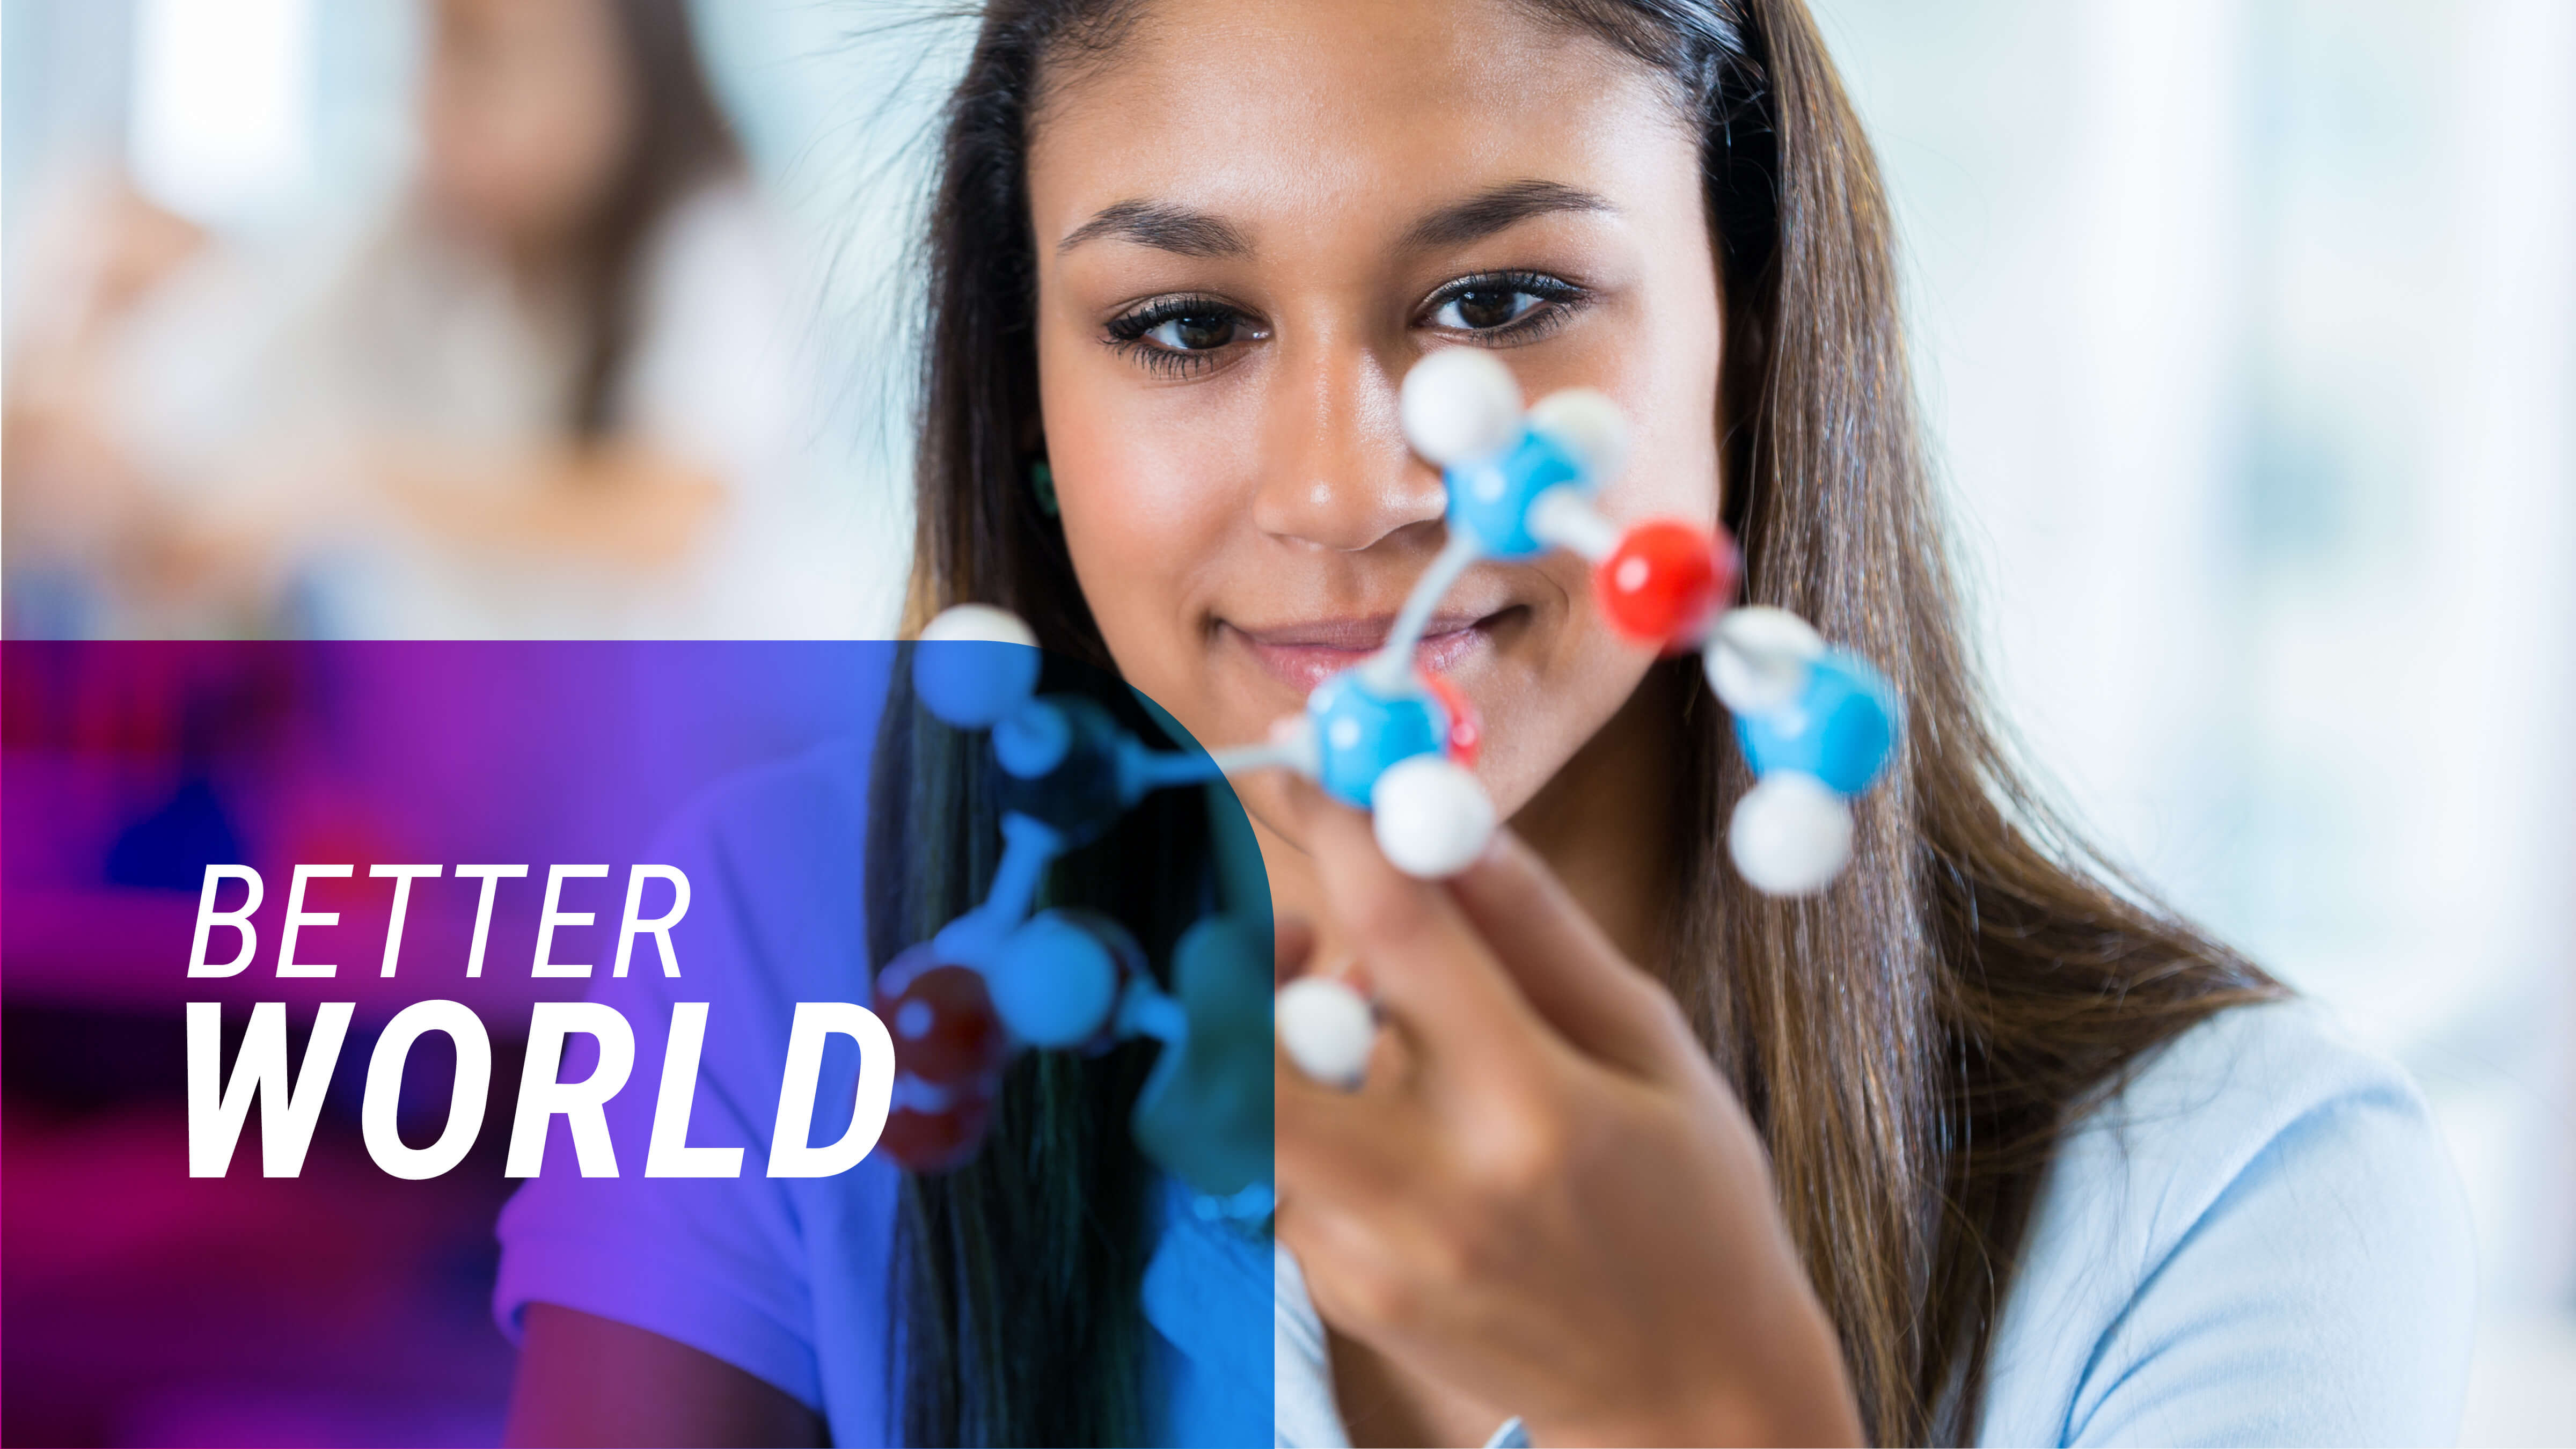 'Better World' text over an image of a female looking at a figure of a molecule.